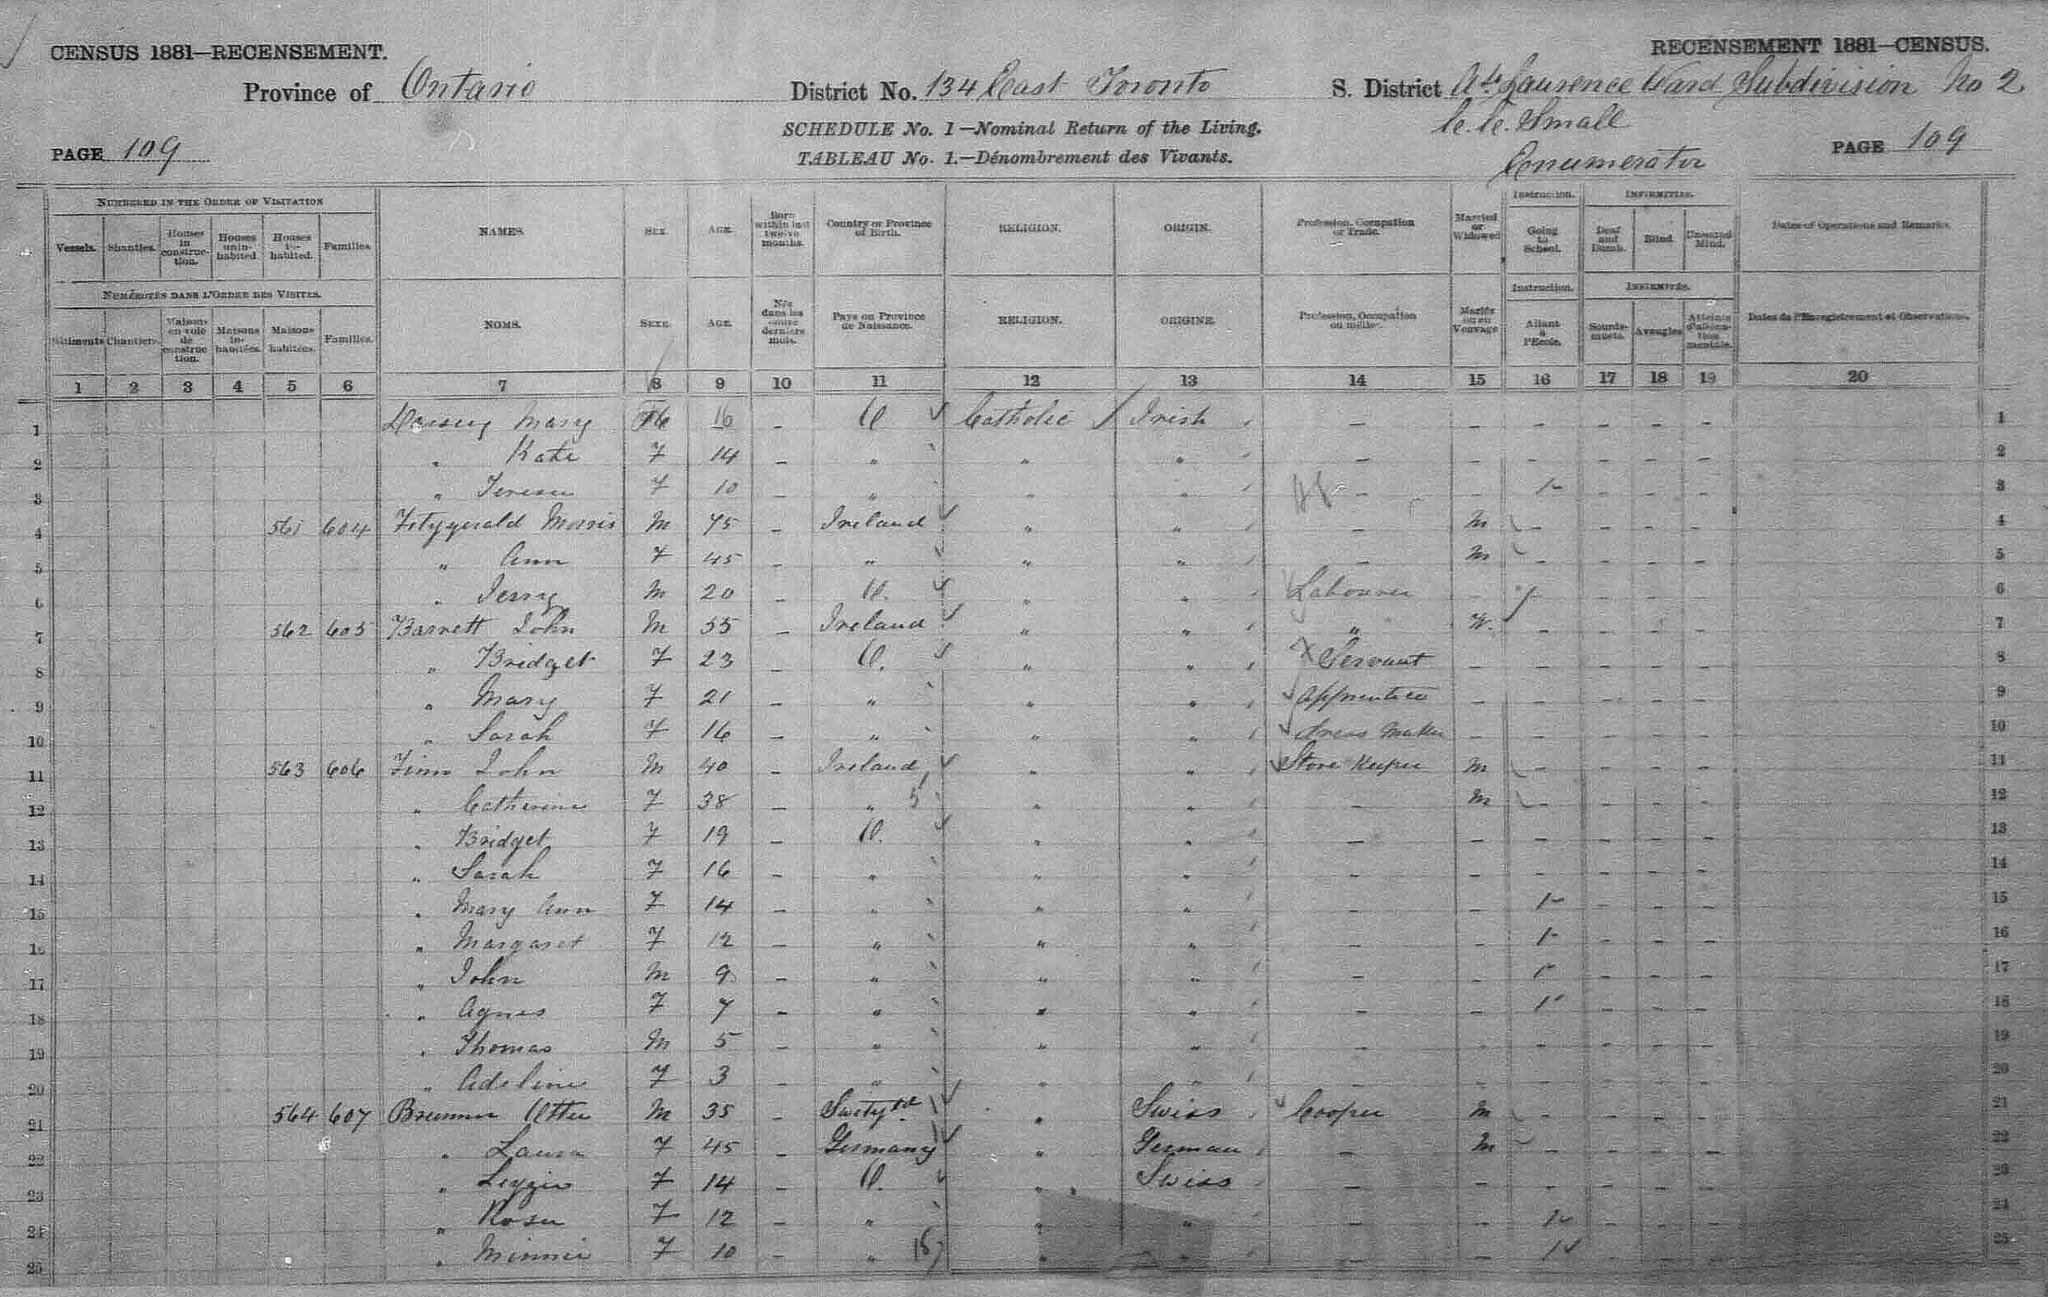 1881 Candian Census for Otto Brunner